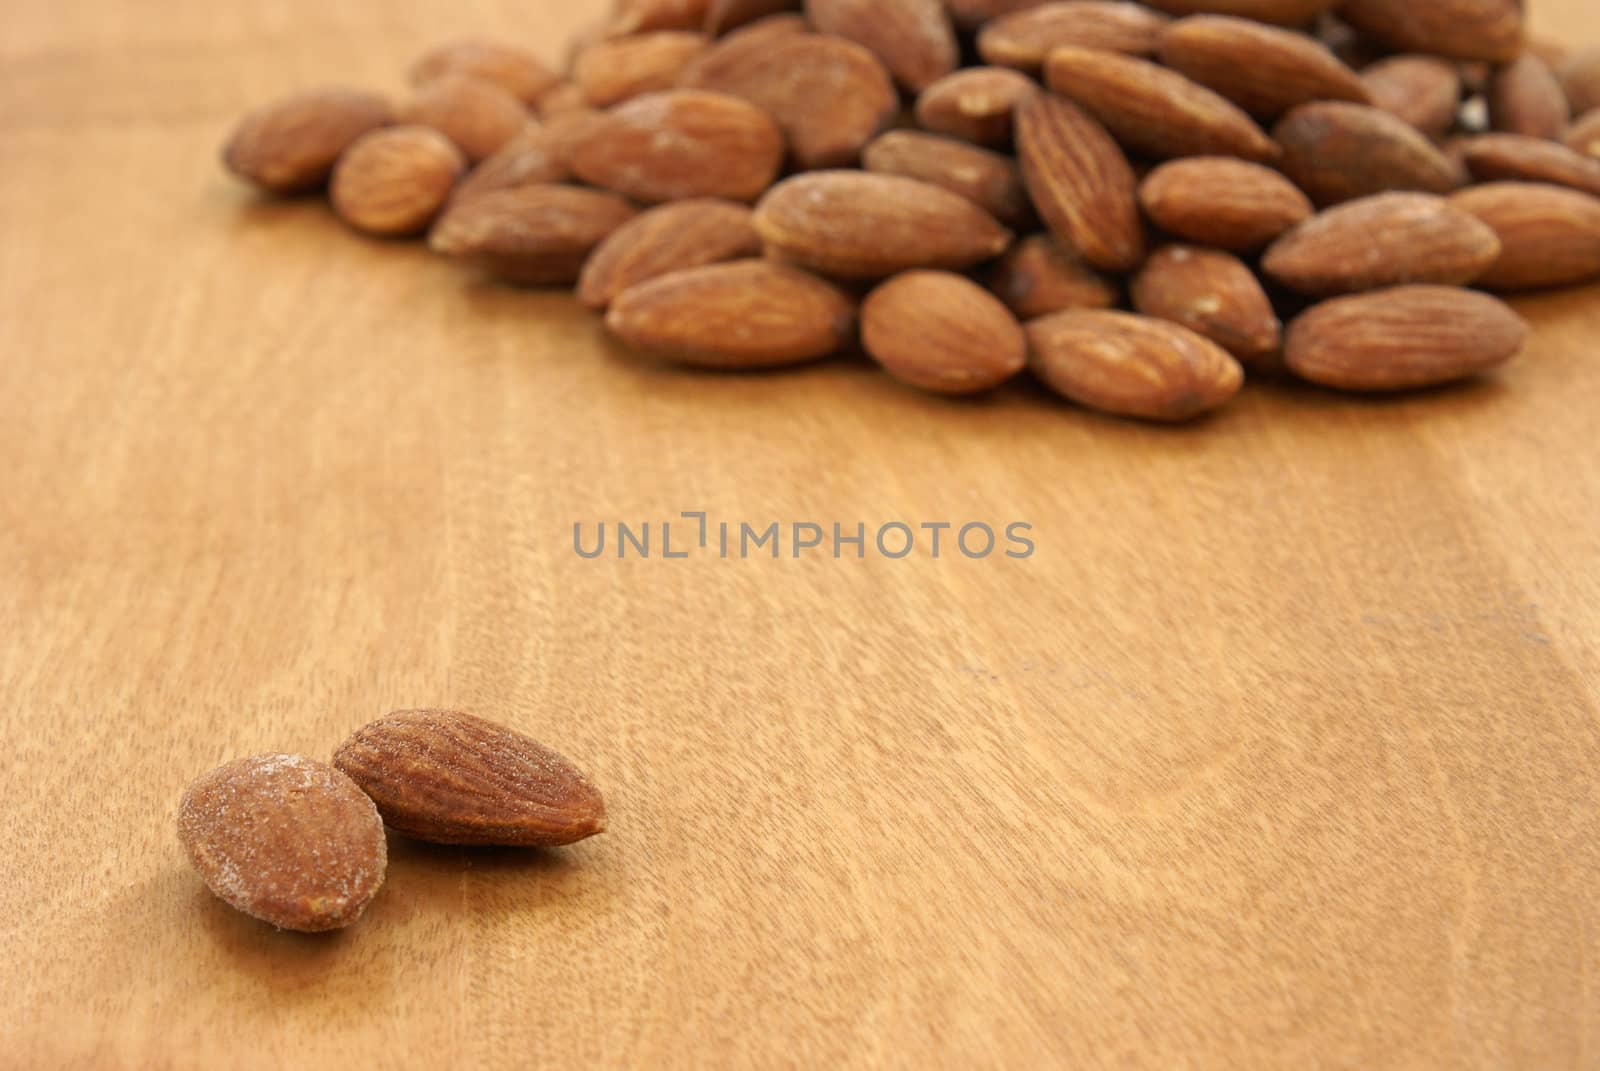 A heaping pile of almonds behind two that are away from the rest.